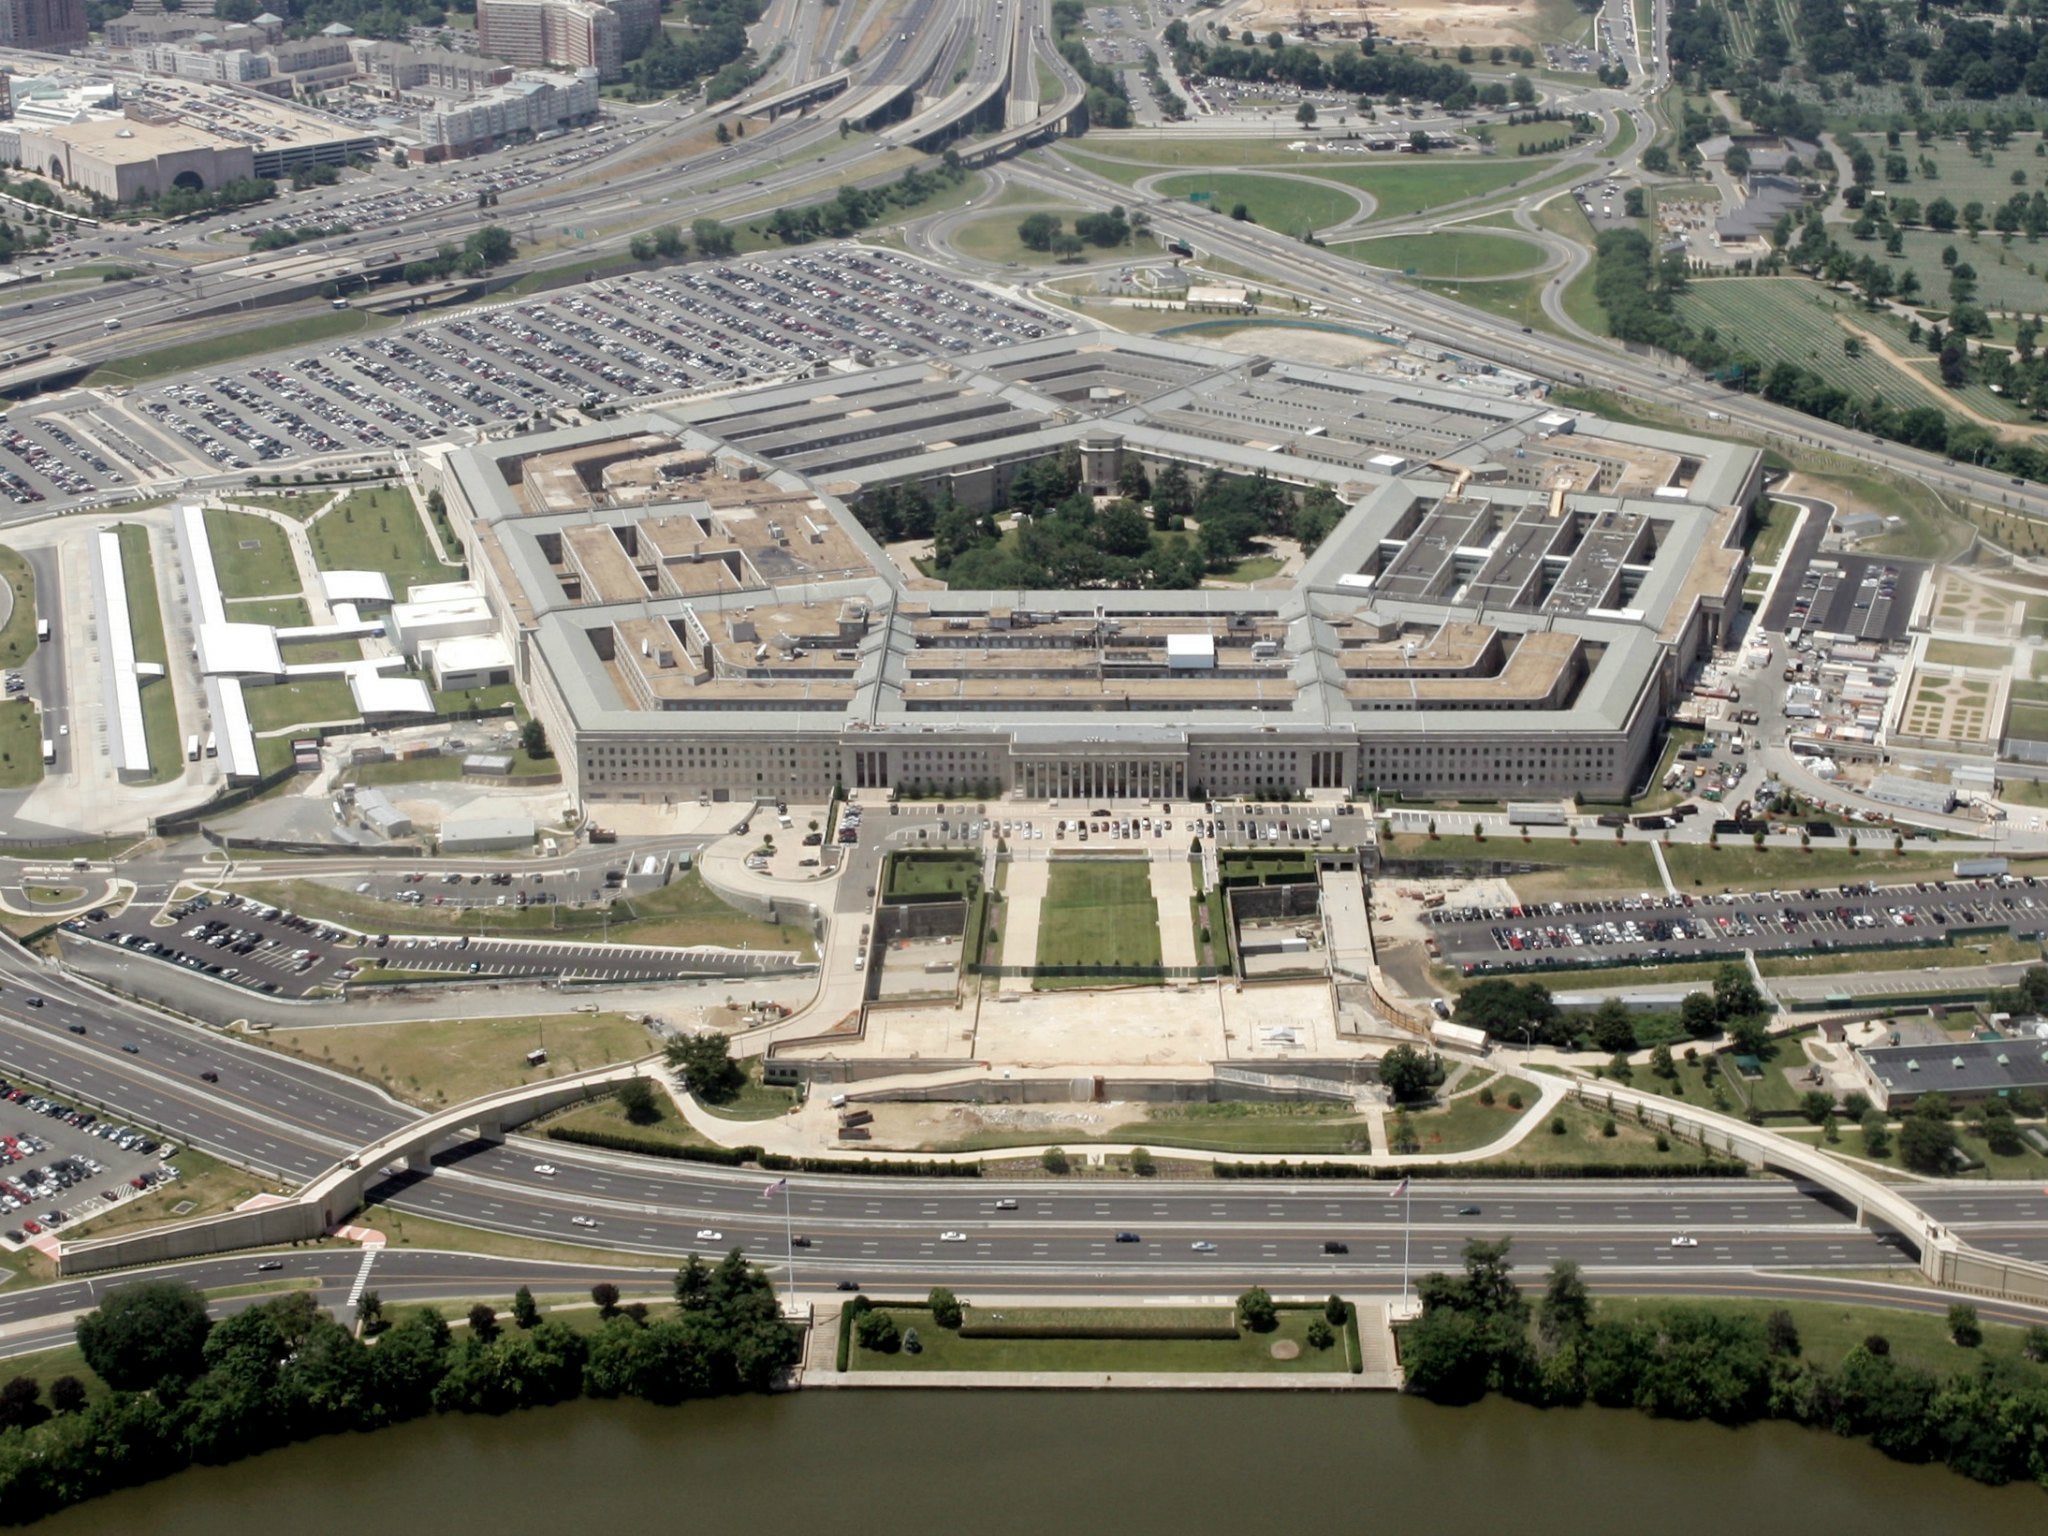 The U.S. Pentagon, seen here on June 15, 2005, was one of the sites a Russian jet was said to have flown over